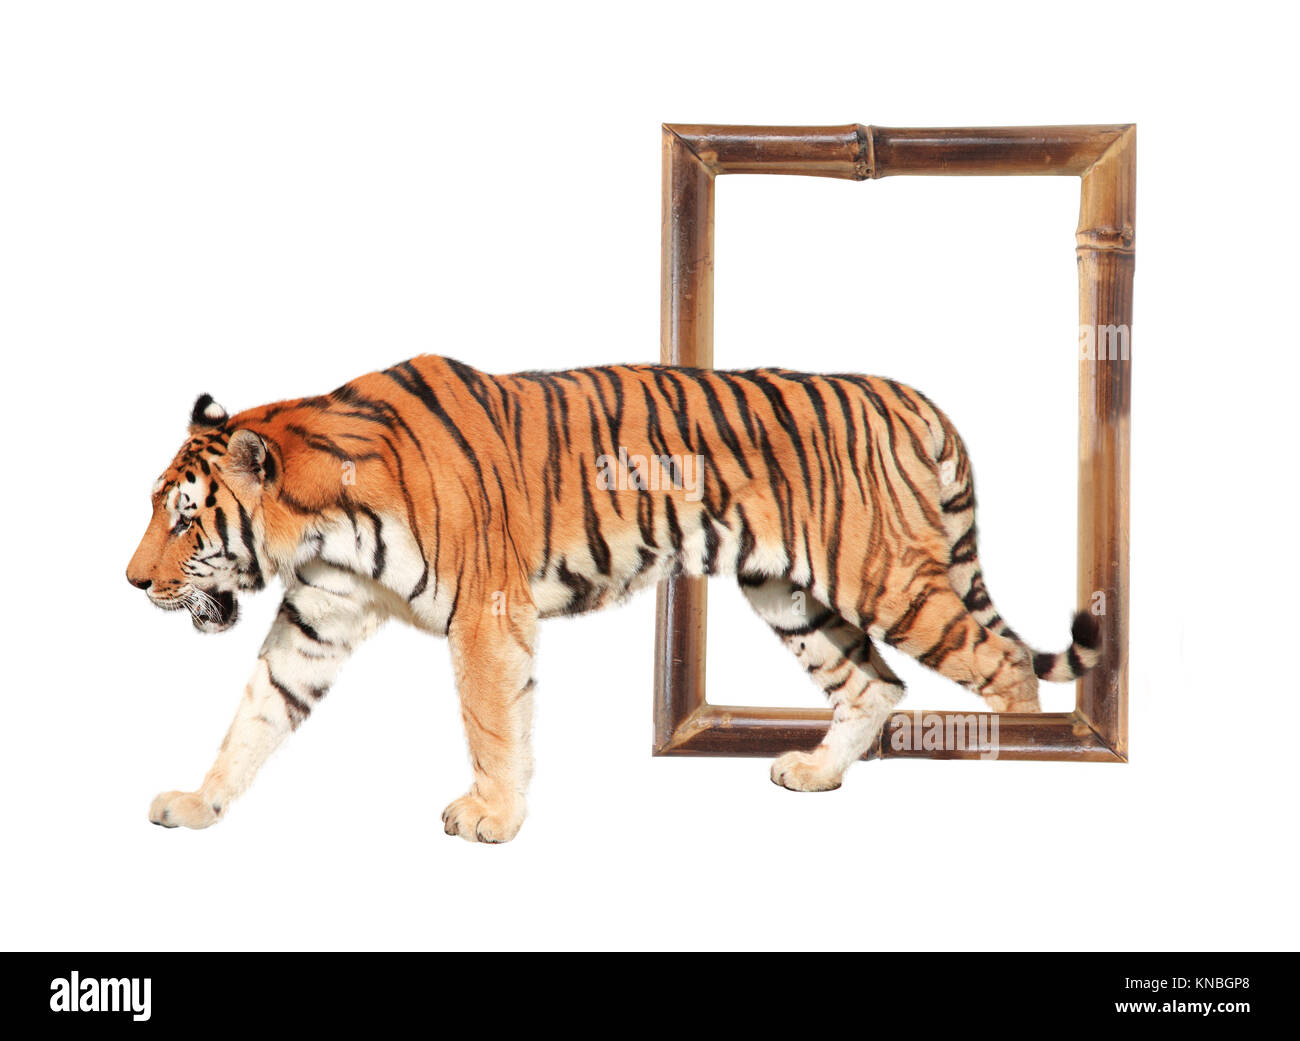 Tiger coming out of a bamboo frame (3d effect). Isolated on white background Stock Photo